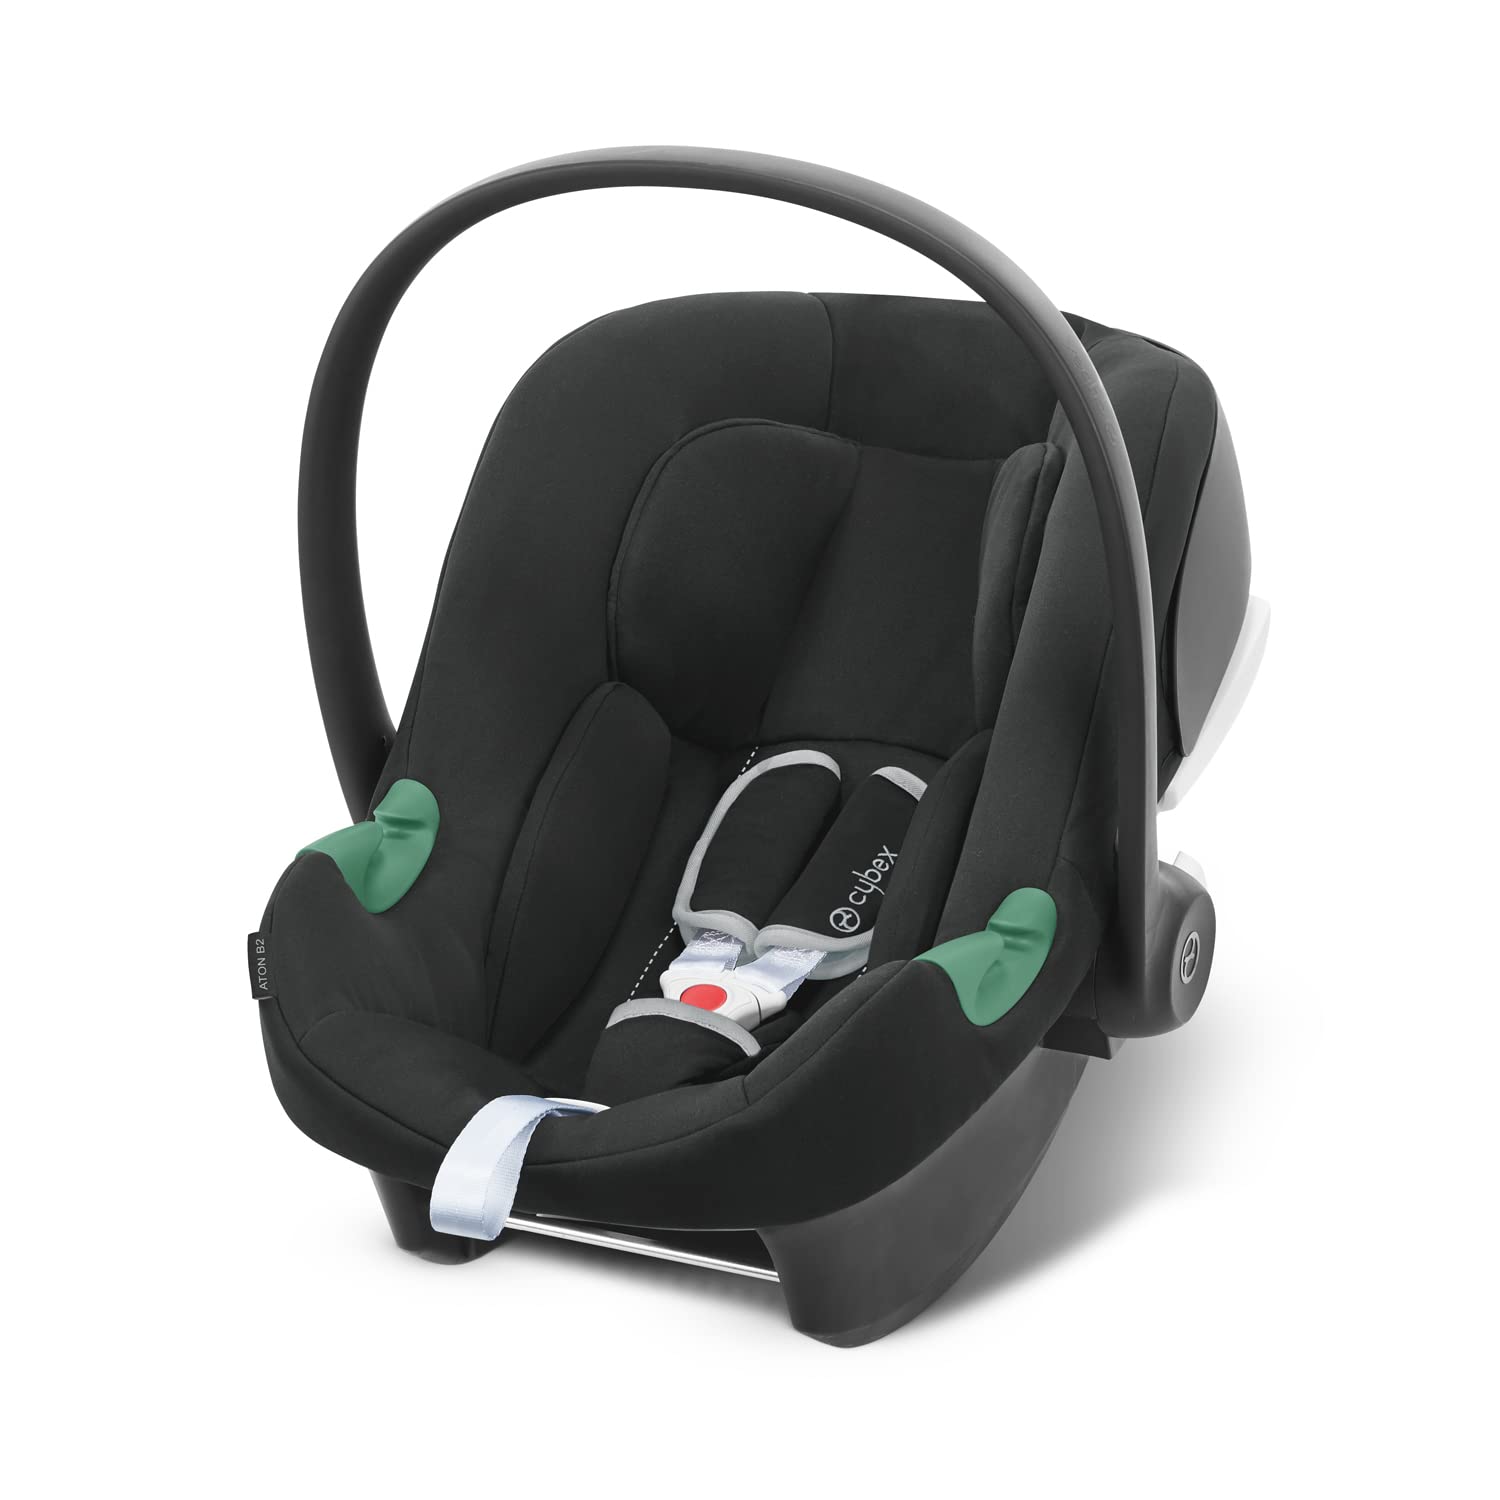 CYBEX Aton B2 i-Size Baby Car Seat from Birth to Approx. 24 Months, Max. 13 kg, Includes Newborn Insert, SensorSafe Compatible, Volcano Black